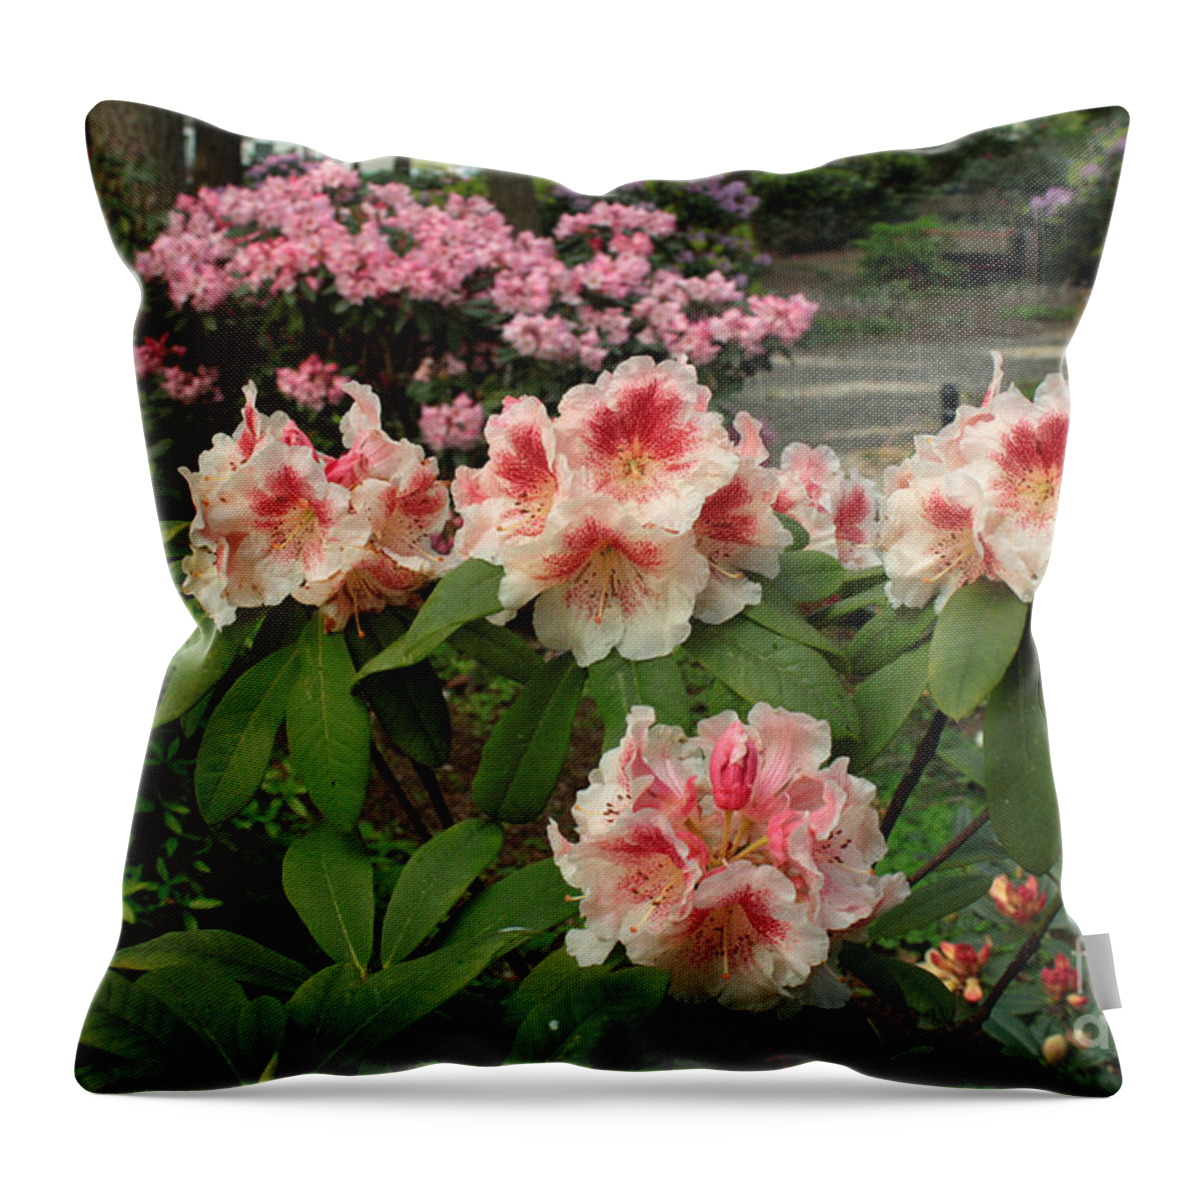 Rhododendrons Throw Pillow featuring the photograph Paprika Spiced by Chris Anderson